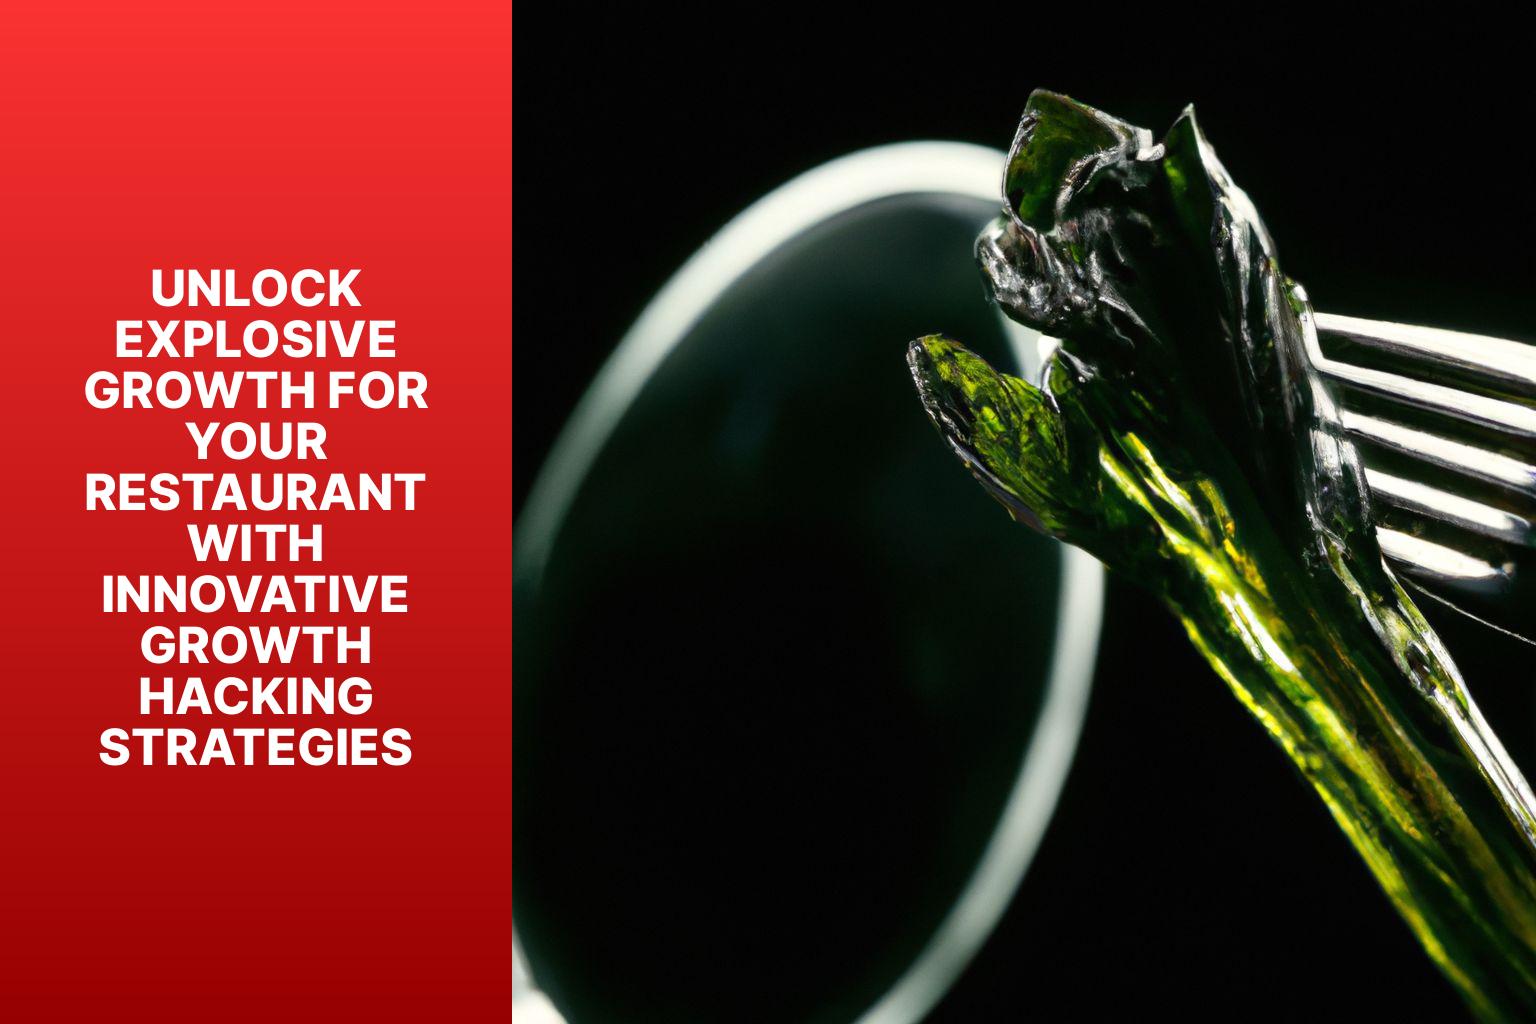 Unlock Explosive Growth for Your Restaurant with Innovative Growth Hacking Strategies